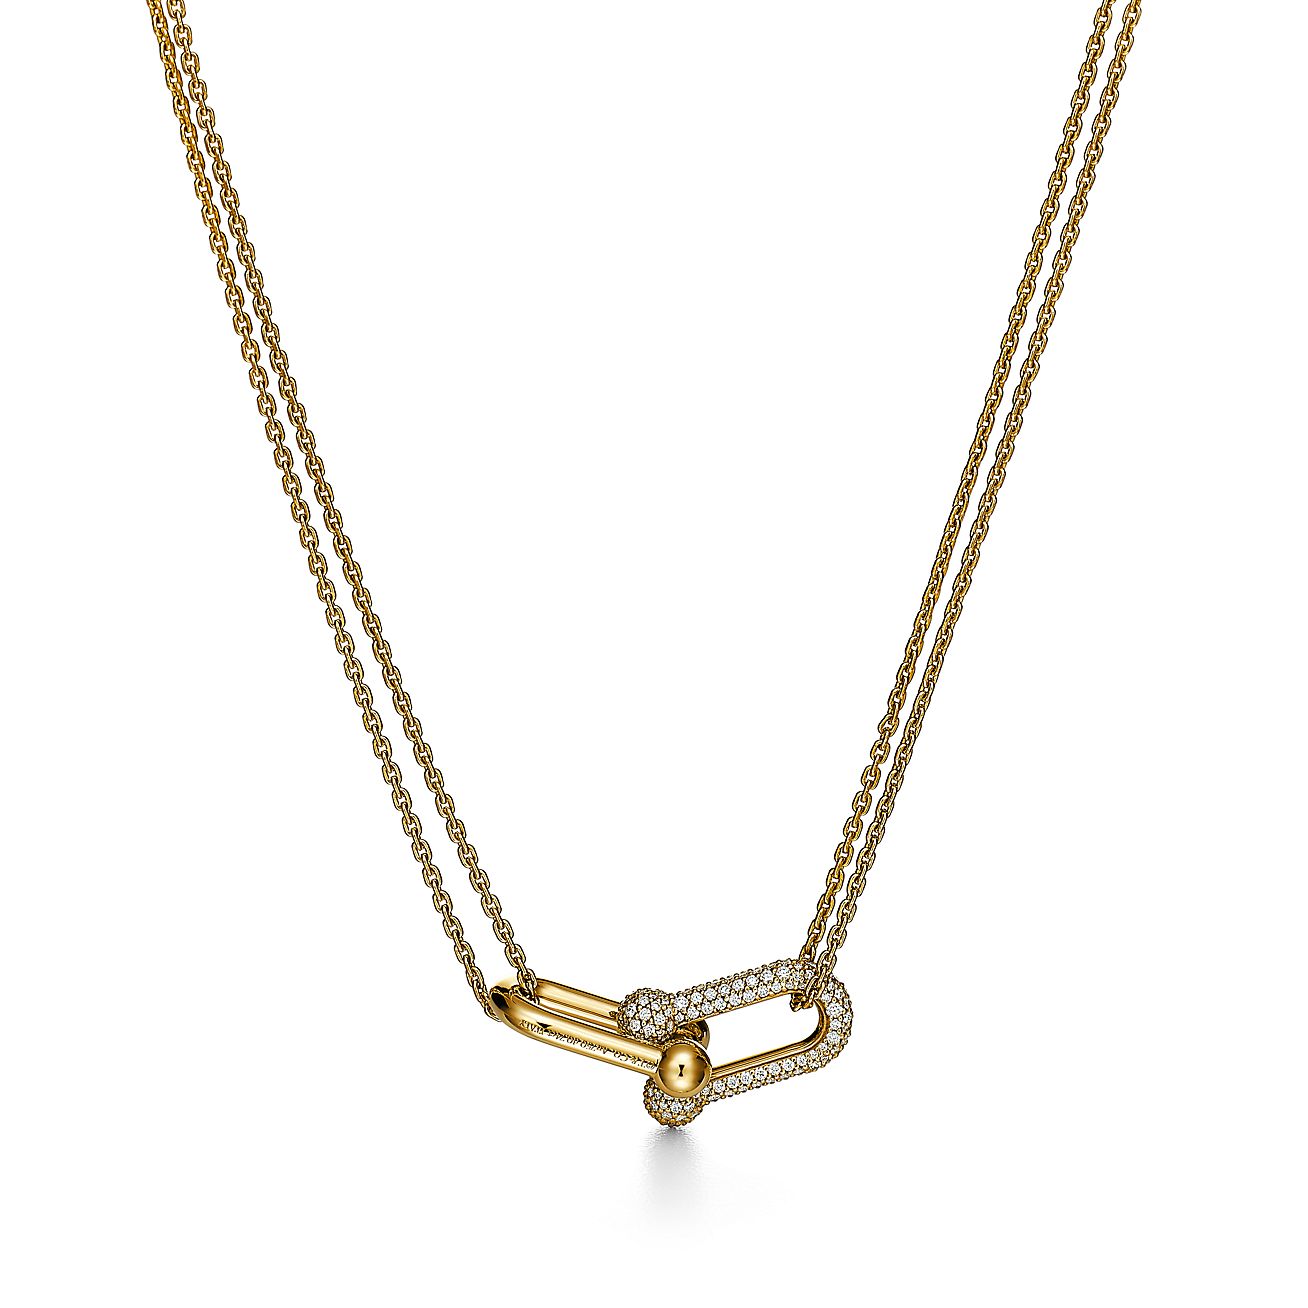 Tiffany Lock Pendant in Yellow Gold with Diamonds, Large